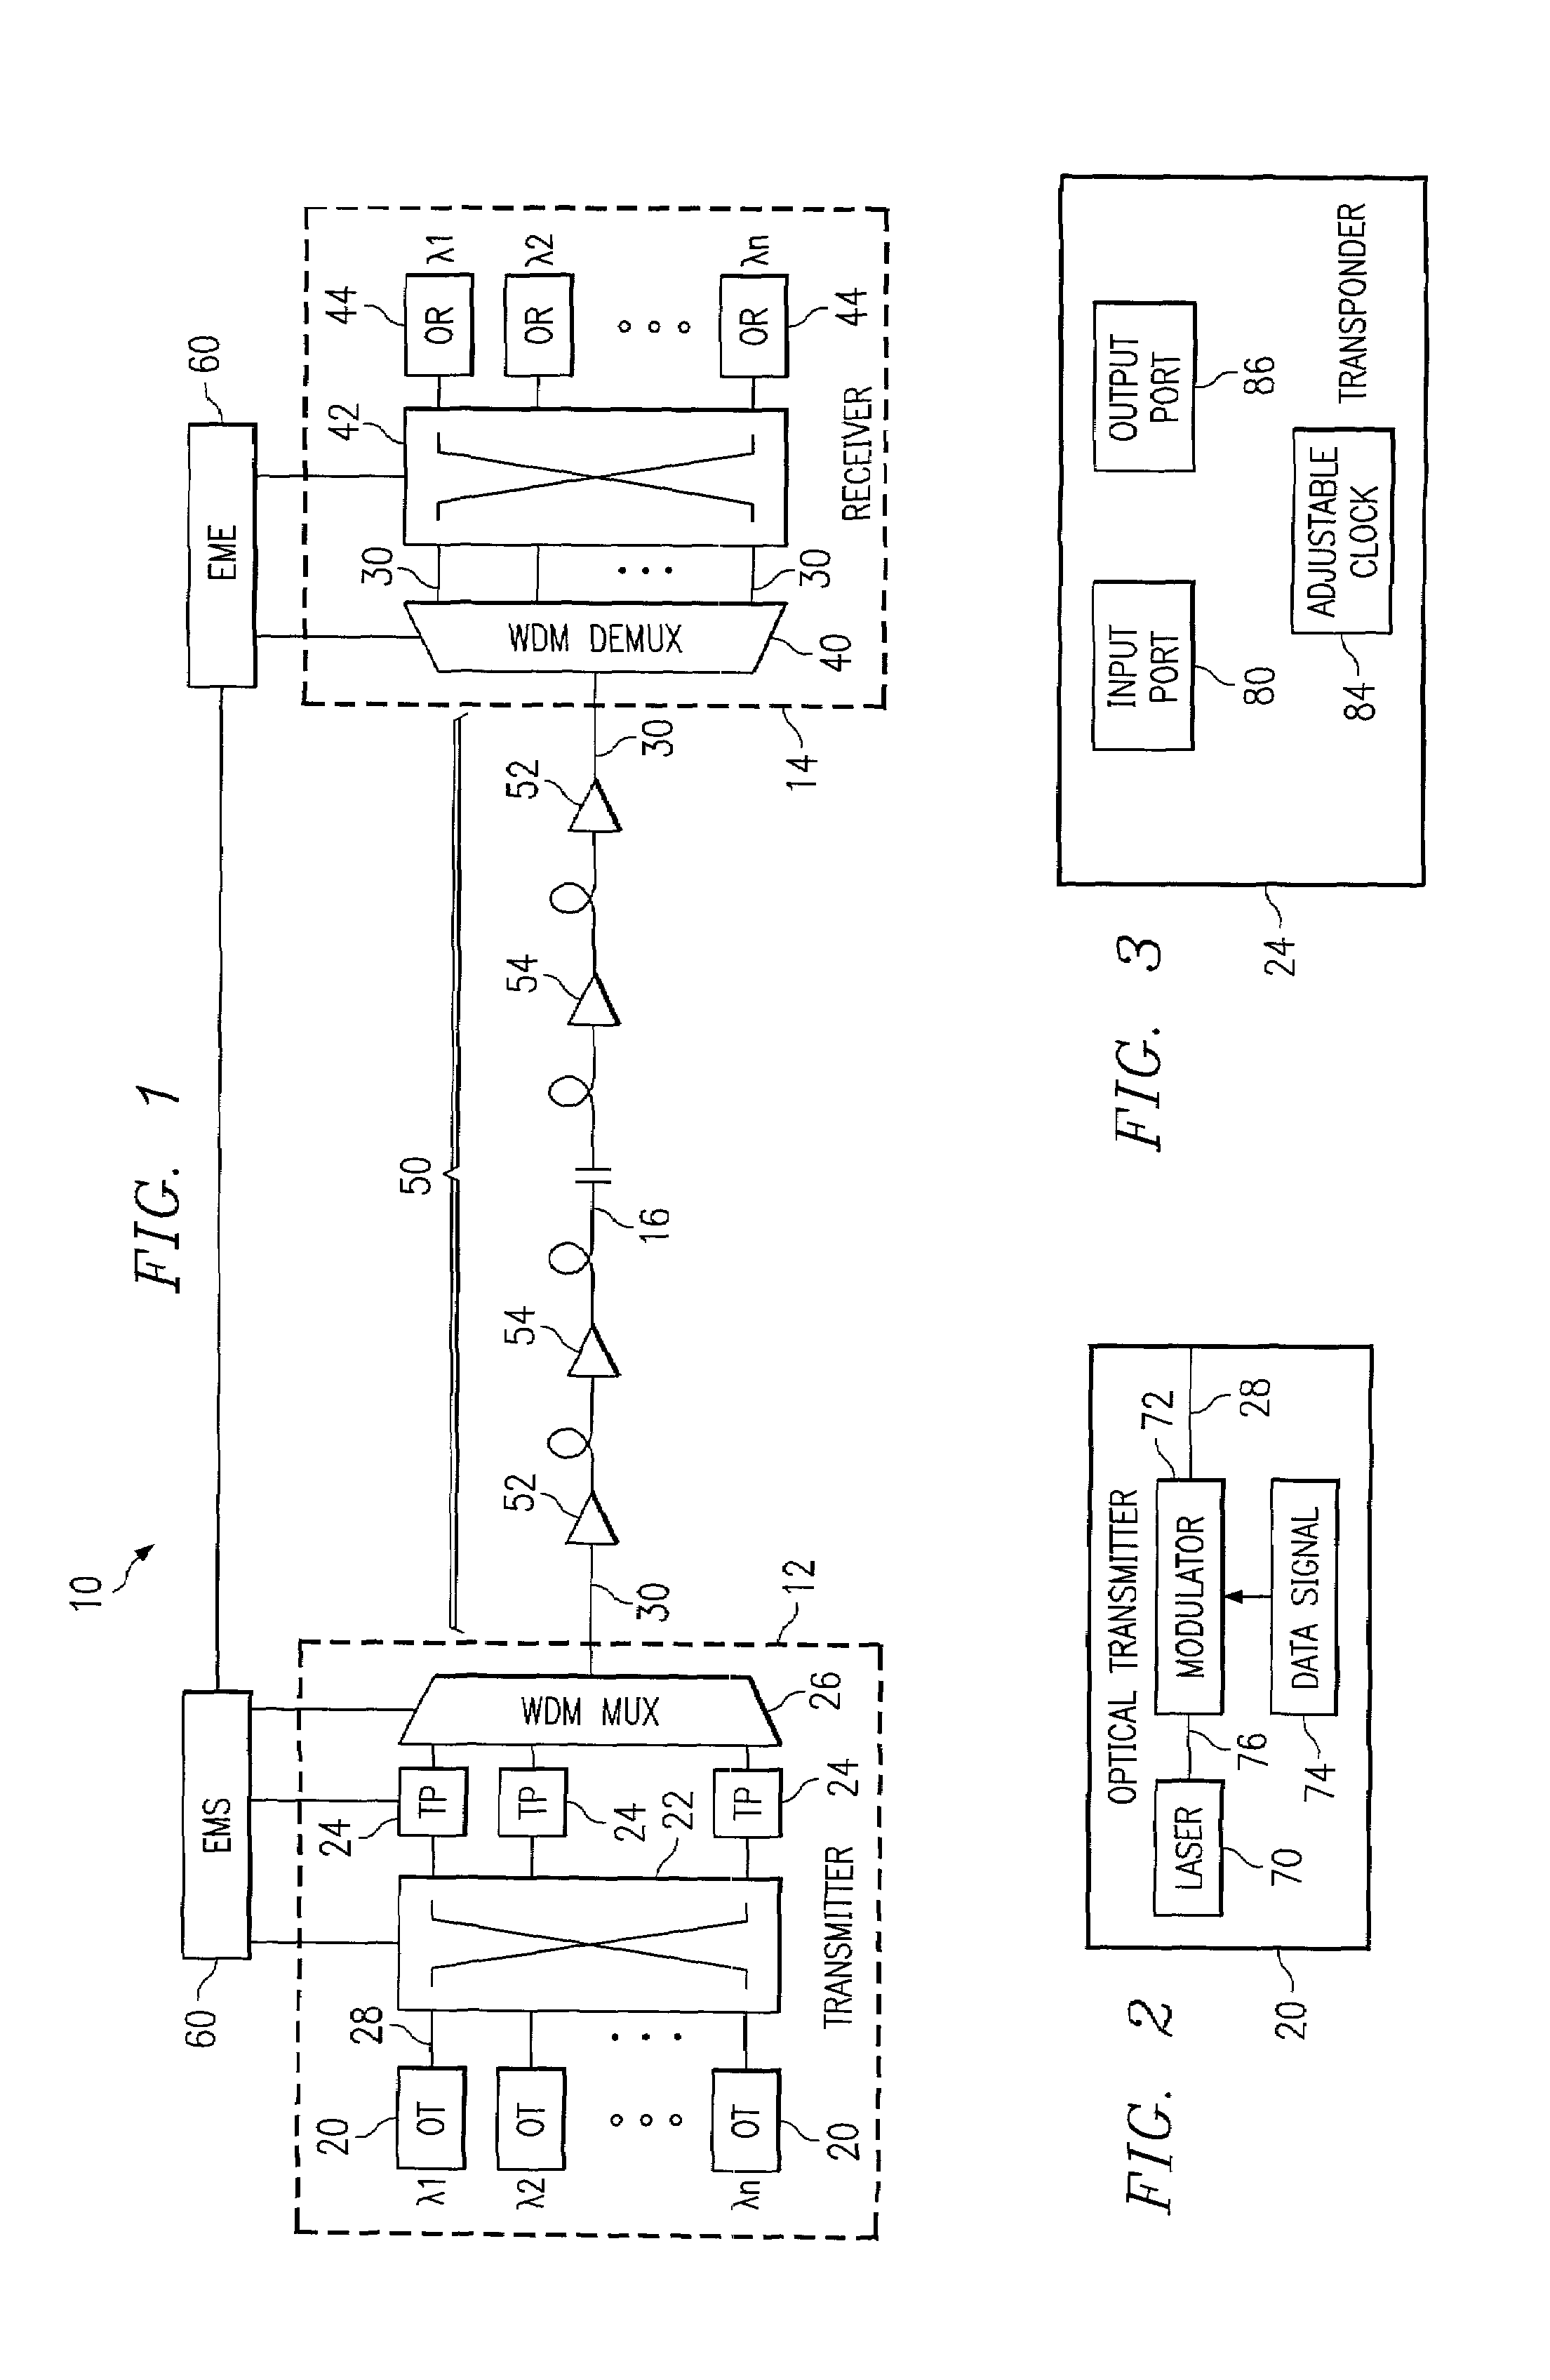 Tunable channel spacing for wavelength division multiplexing (WDM) transport system